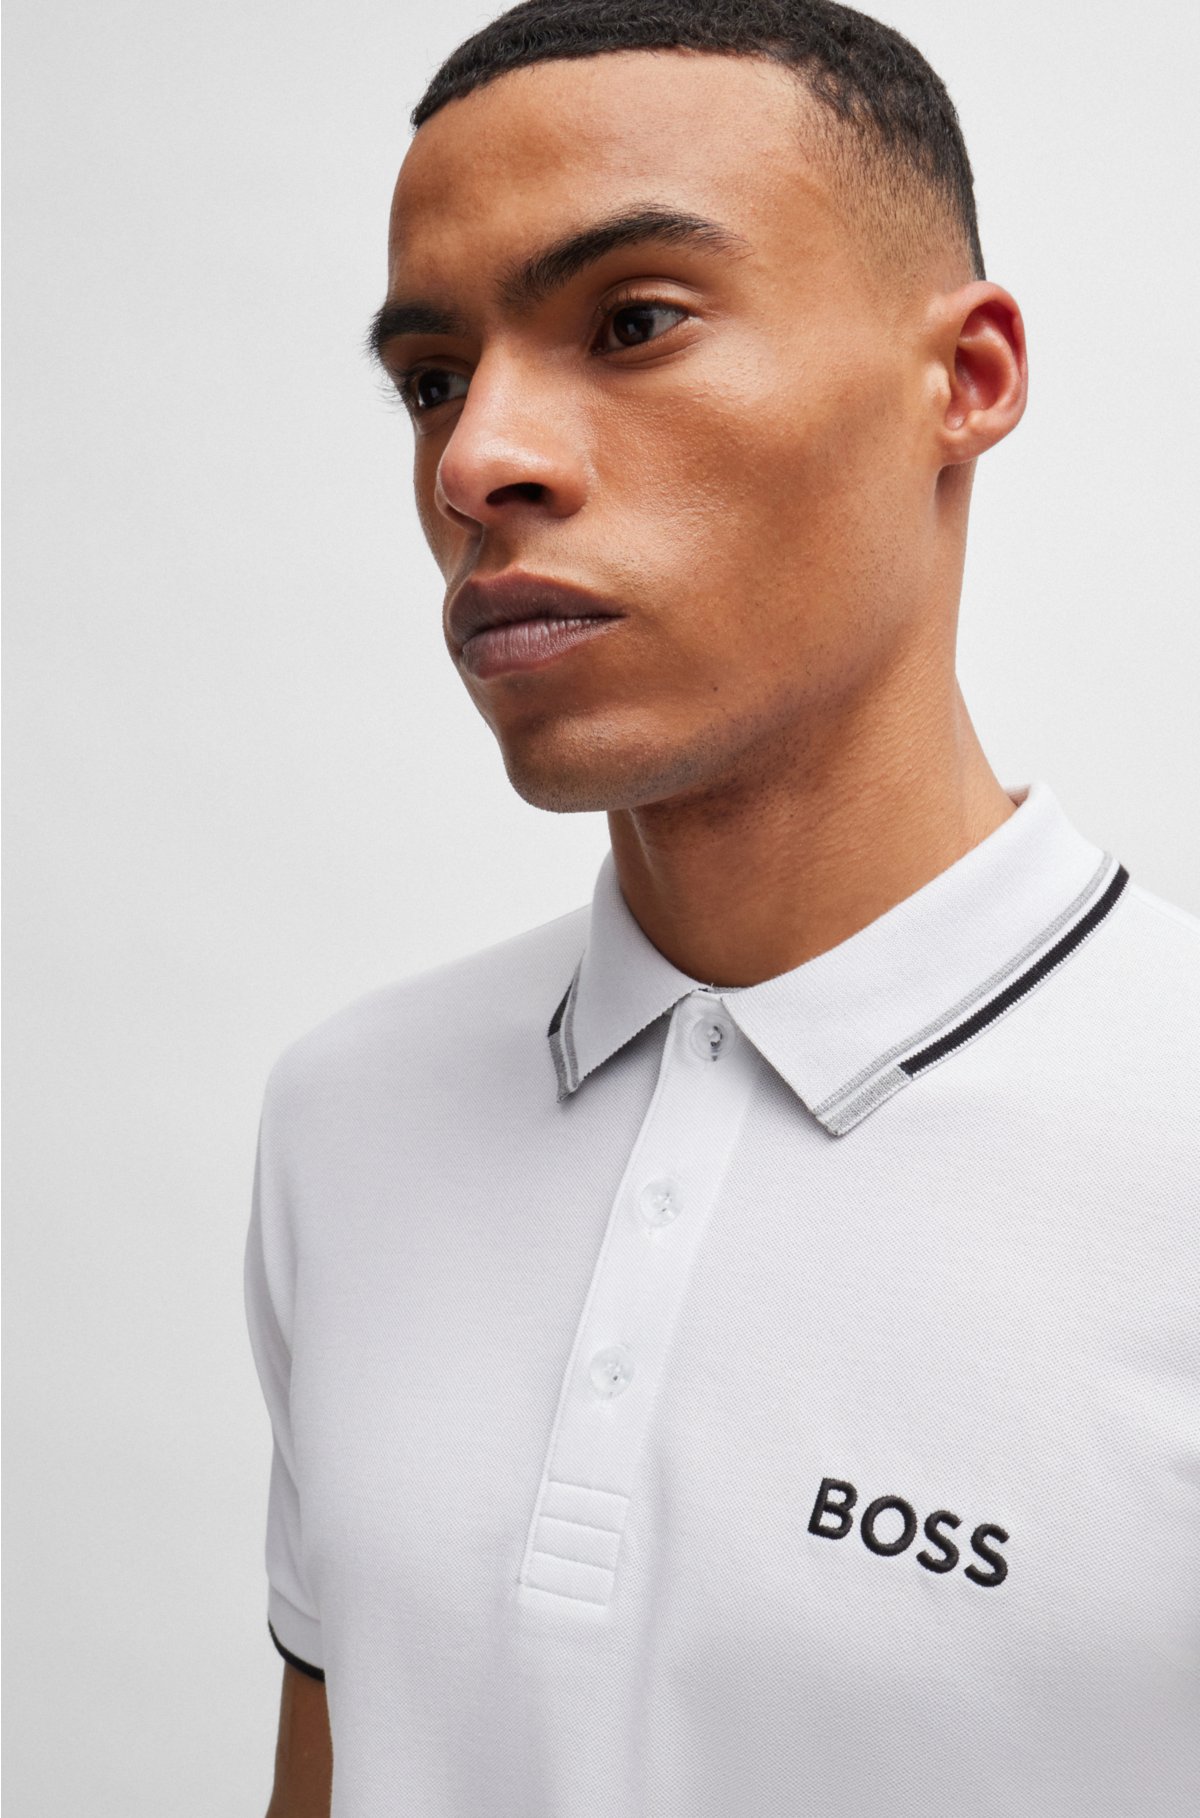 - logos contrast Polo with BOSS shirt